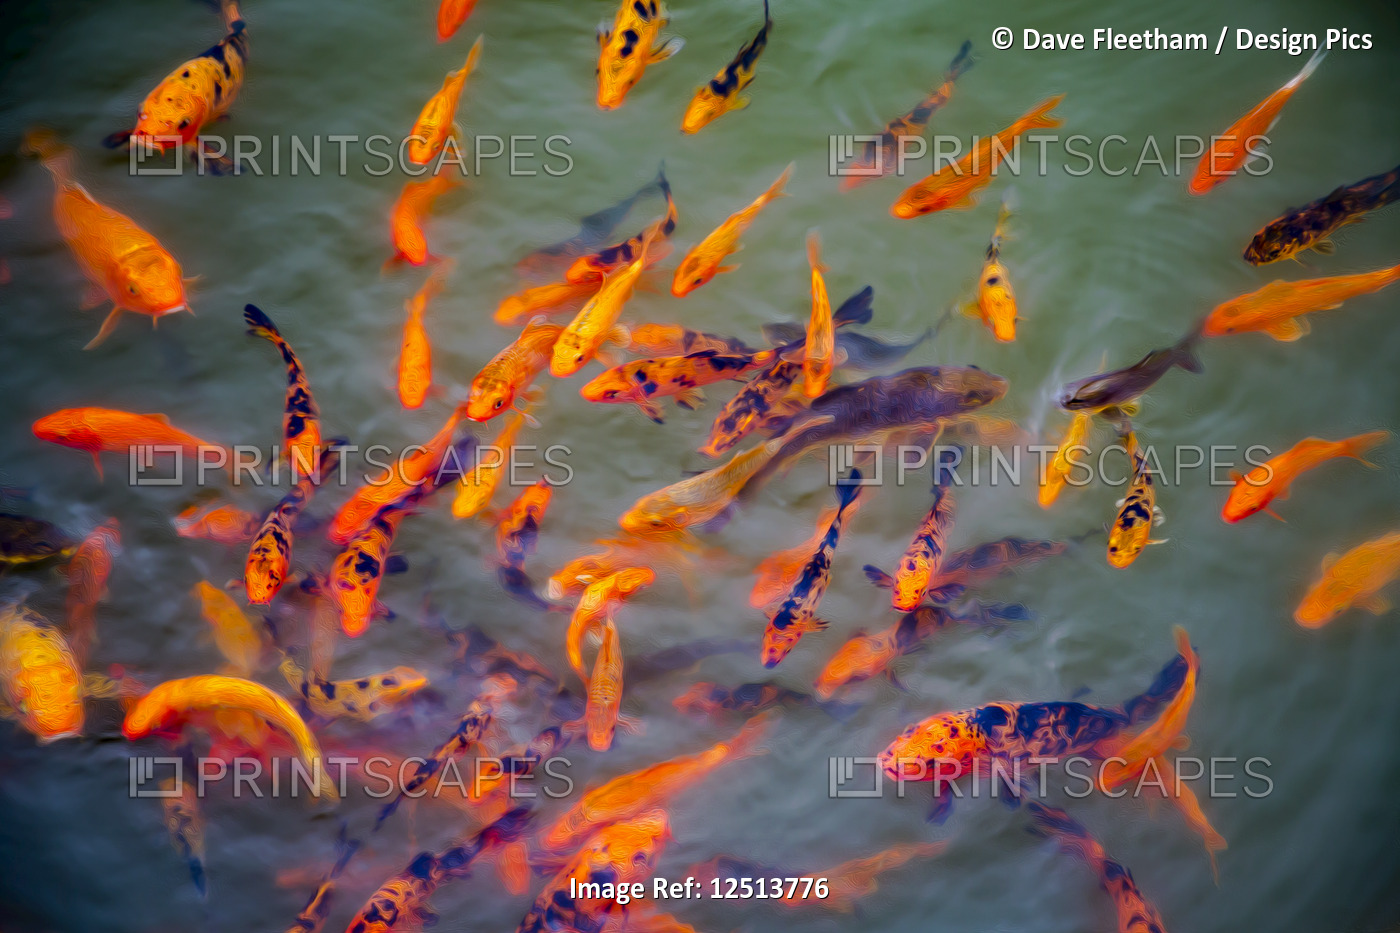 A stylized image of Ornamental Koi fish (Cyprinus carpio) at one of the ponds ...